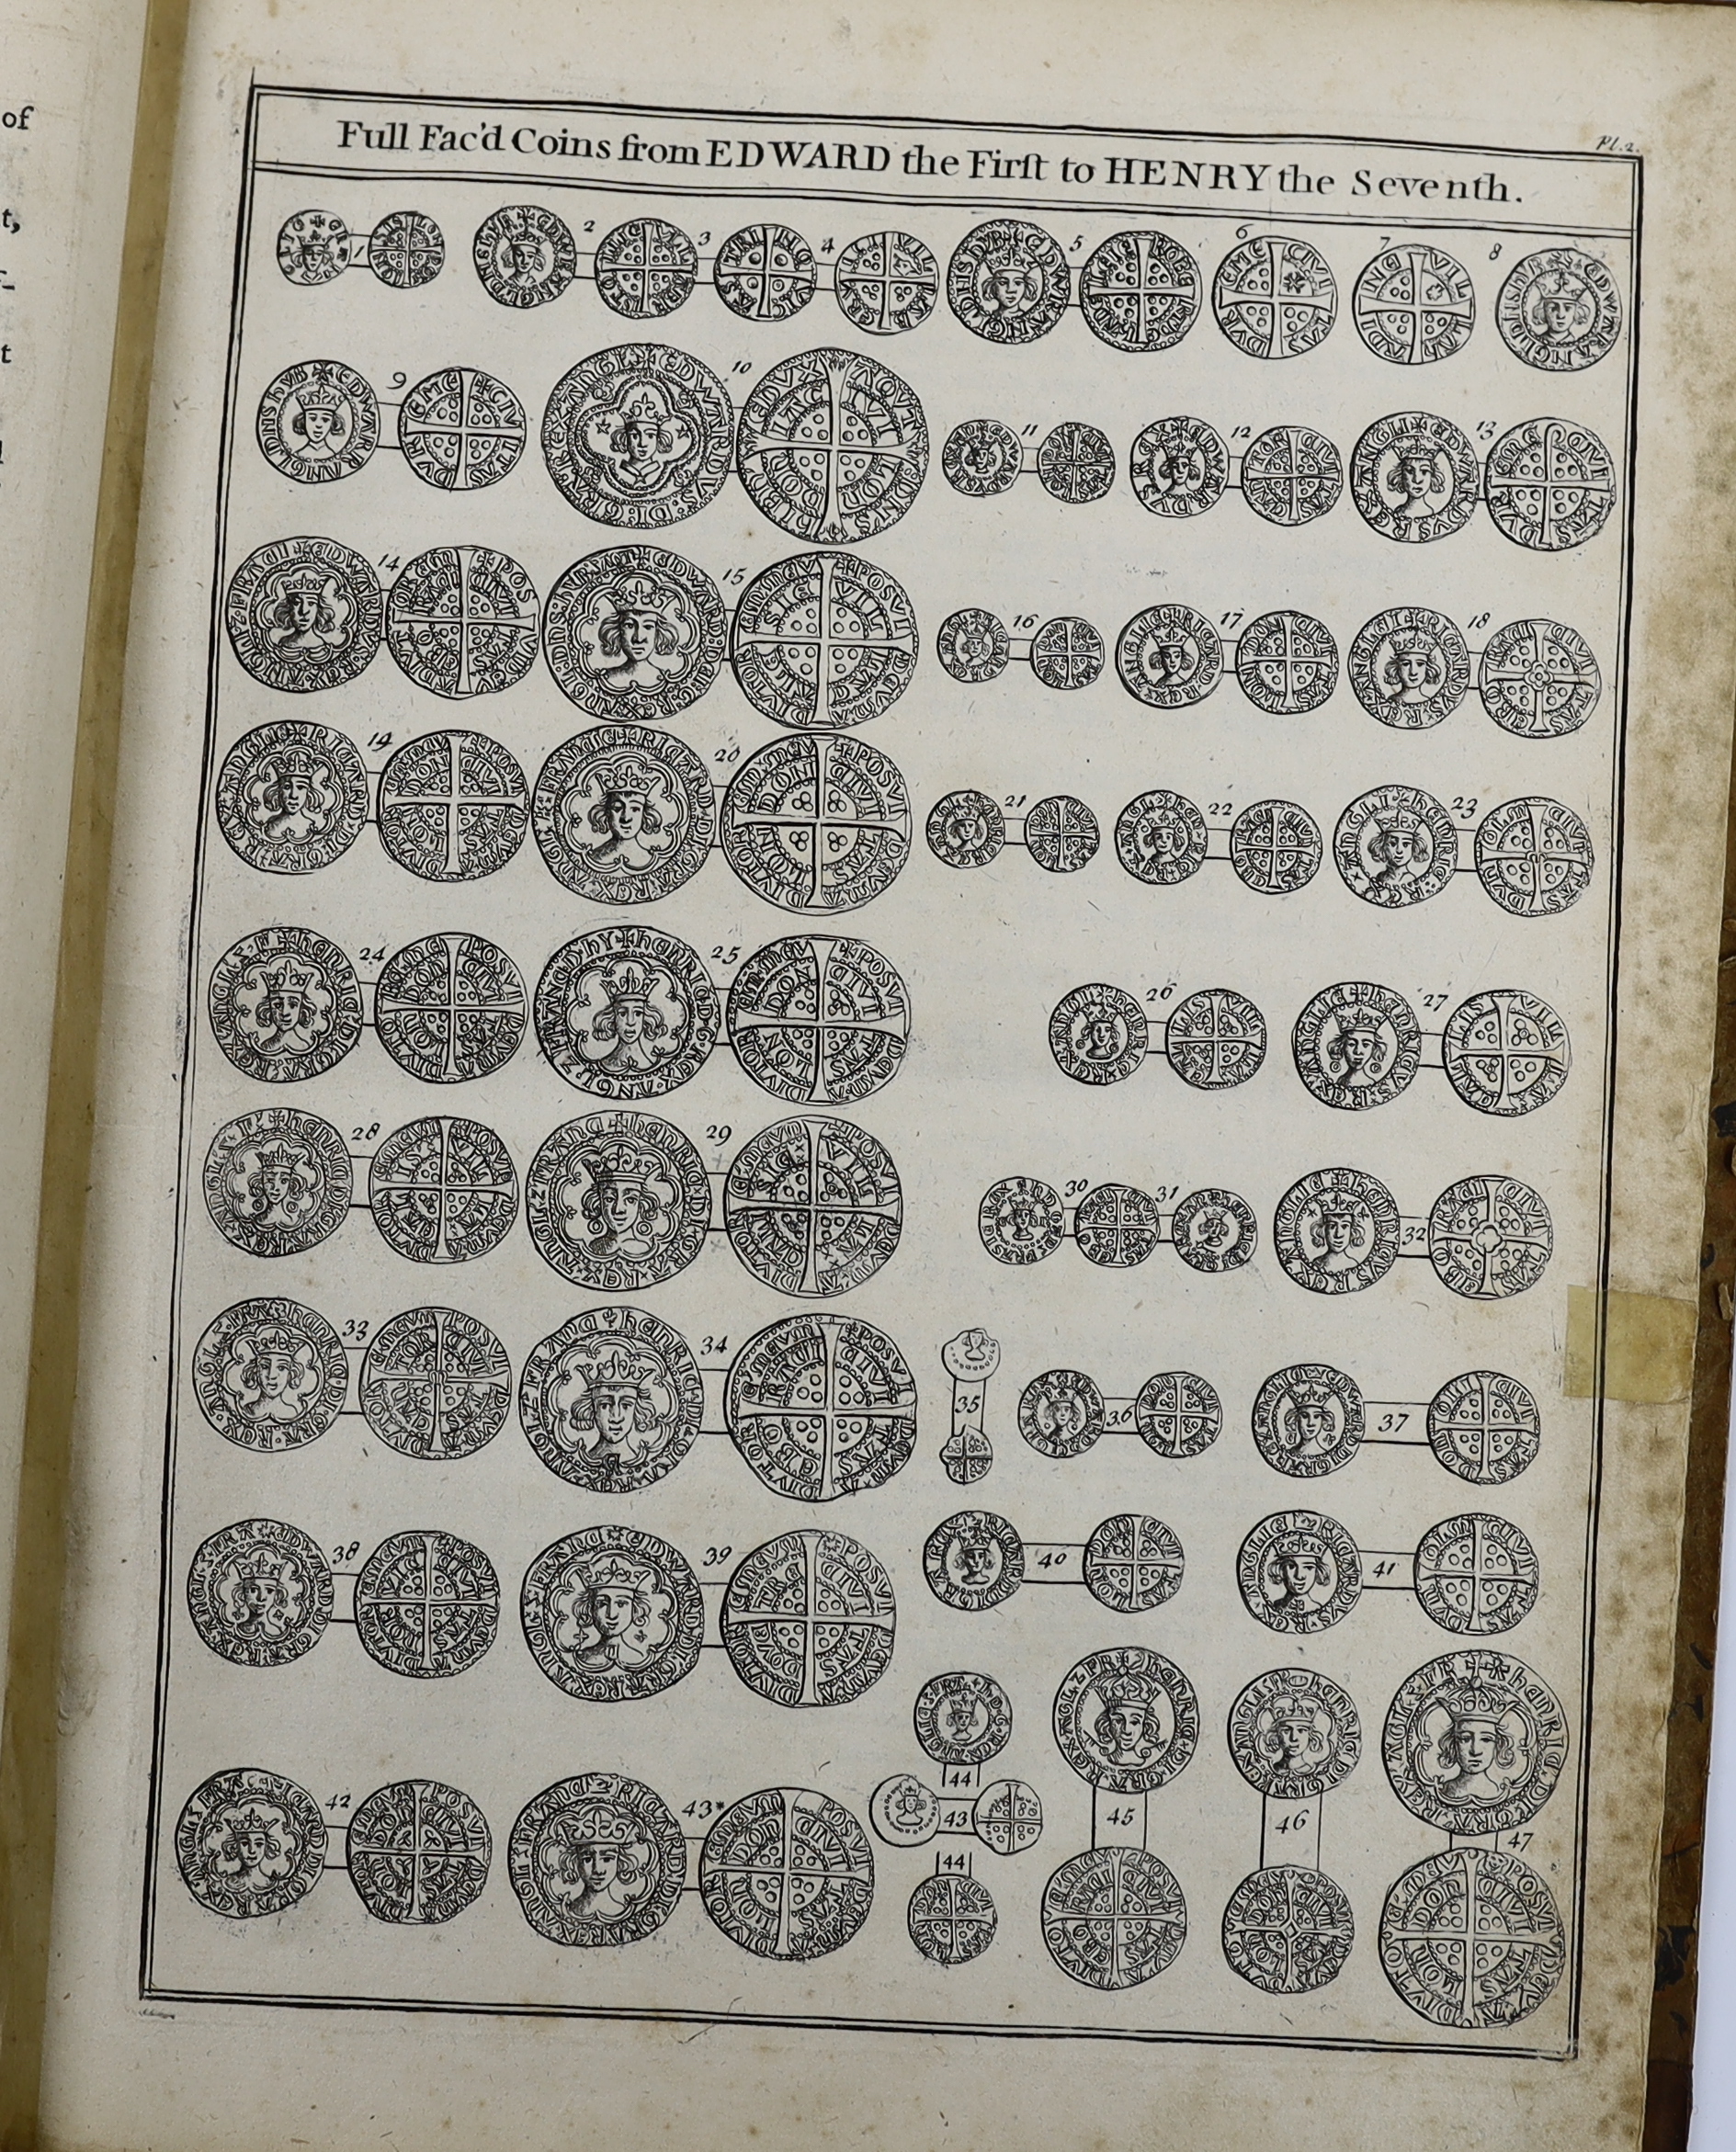 Numismatic history - 'A view of the silver coin and coinage of England from the Norman Conquest to the Present time, printed for T. Snelling, London 1762, one volume, 4to